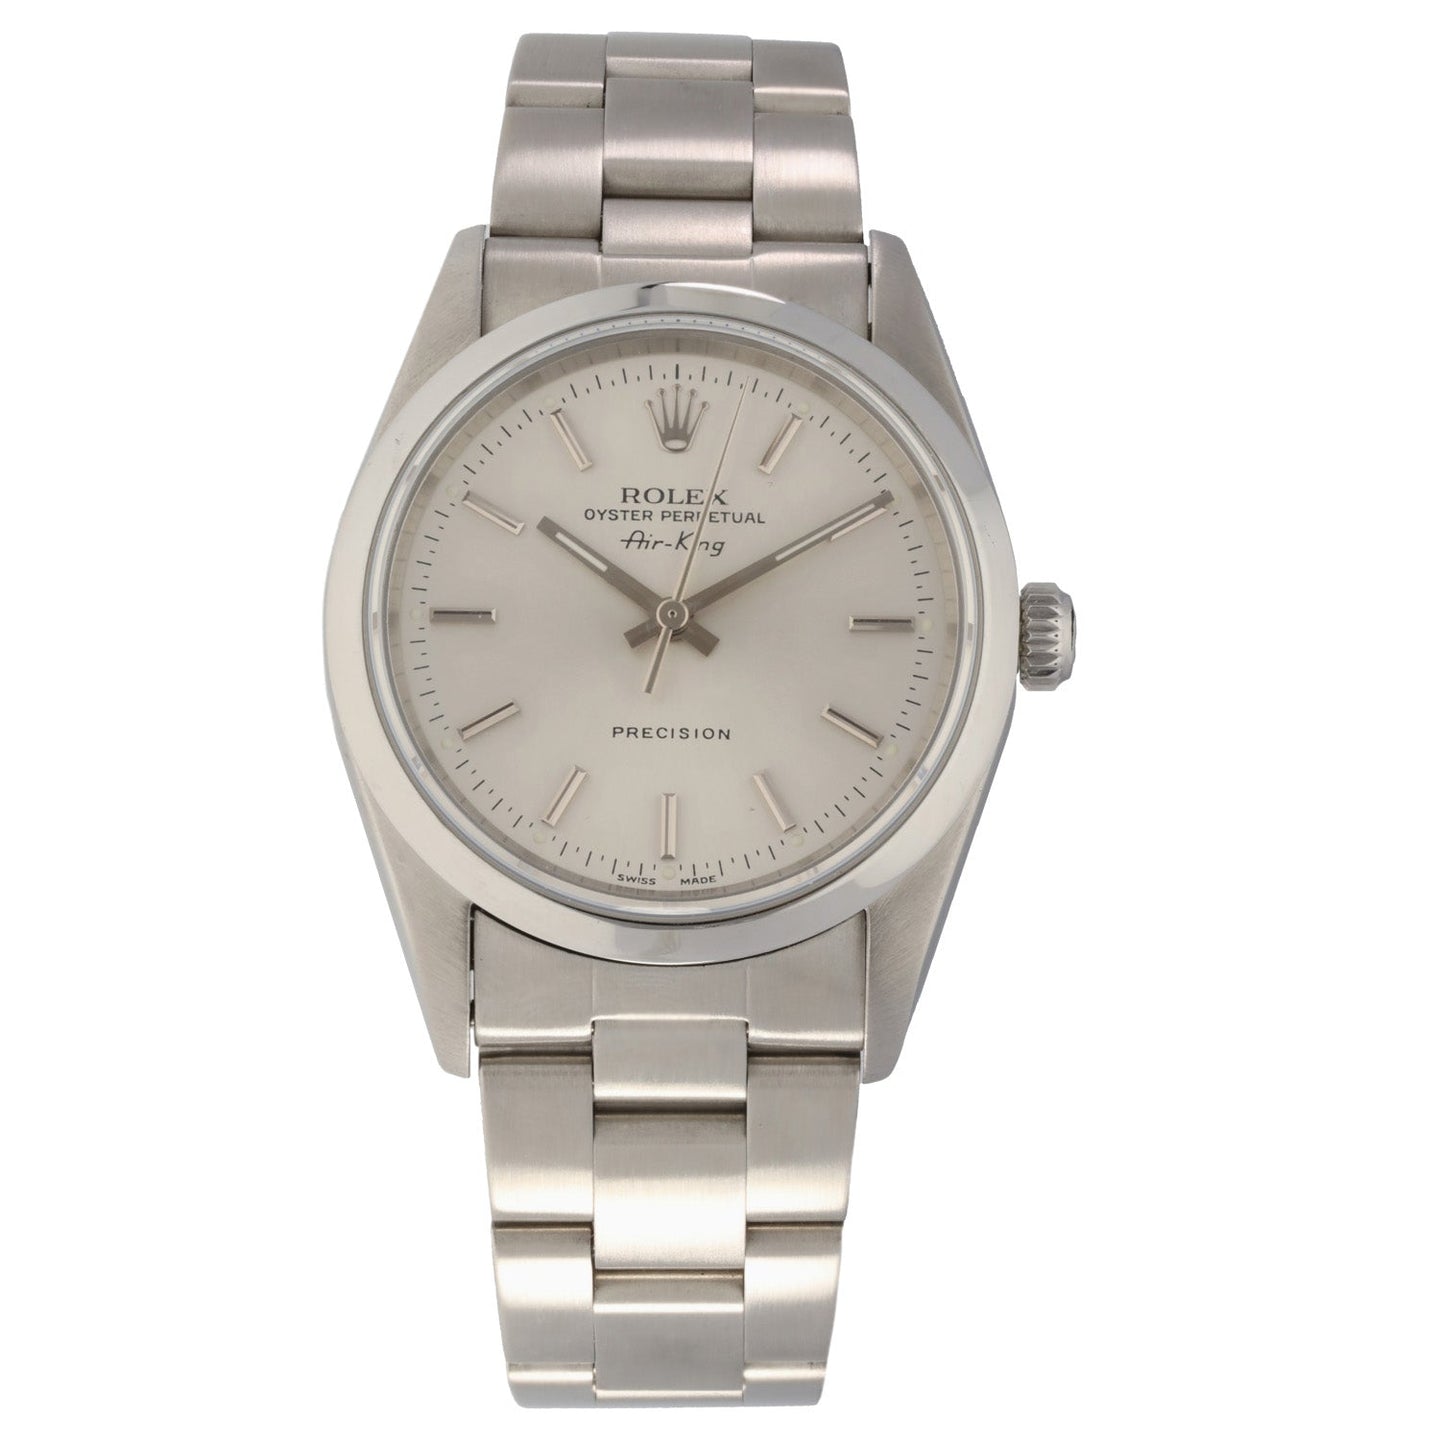 Rolex Air King 14000 34mm Stainless Steel Watch